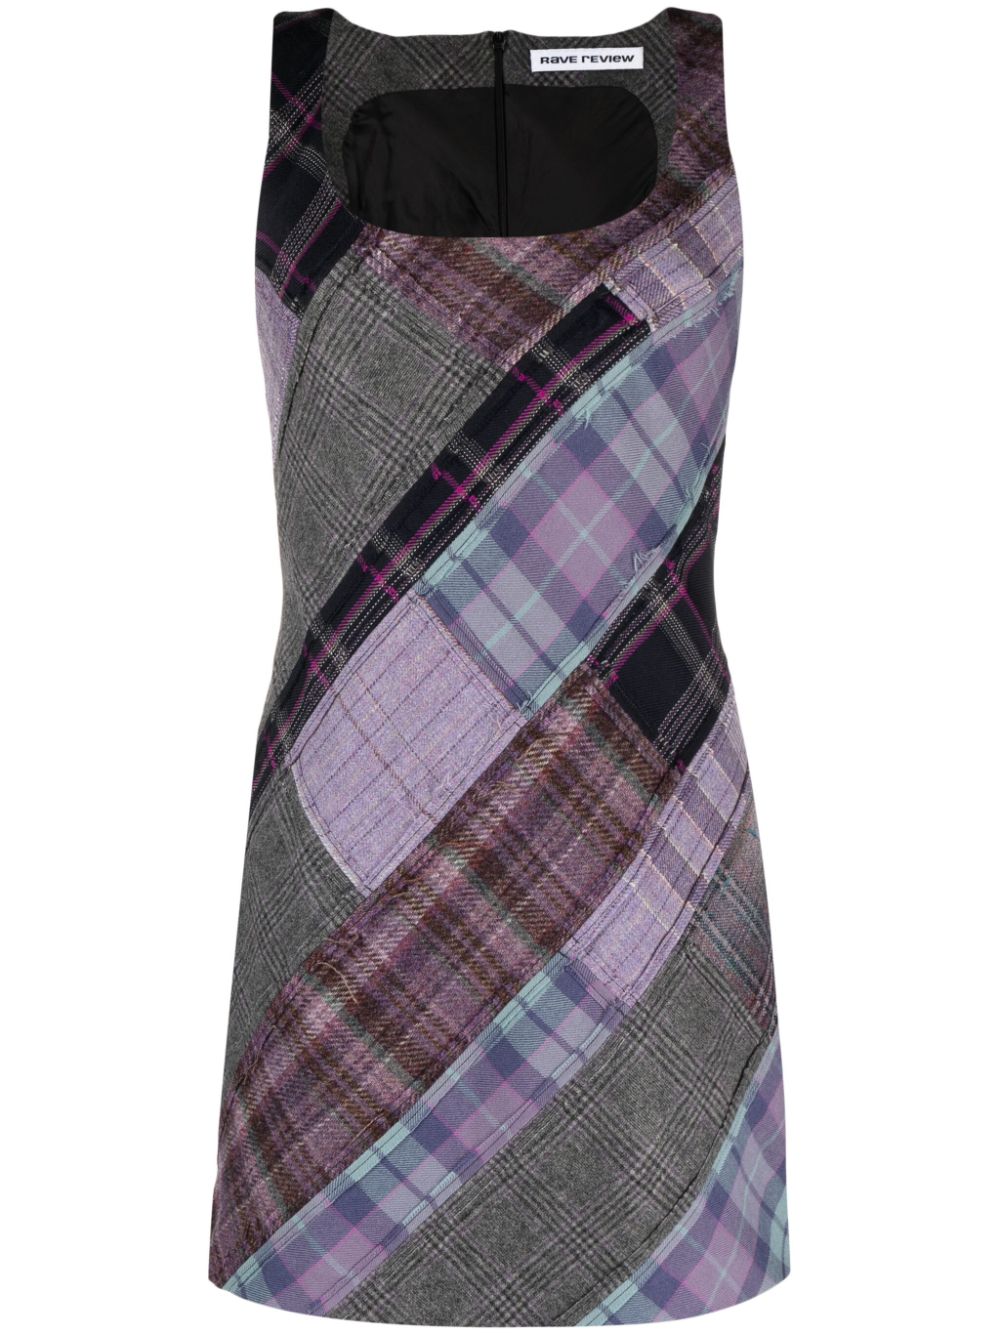 Rave Review Sleeveless Checked Minidress In Purple